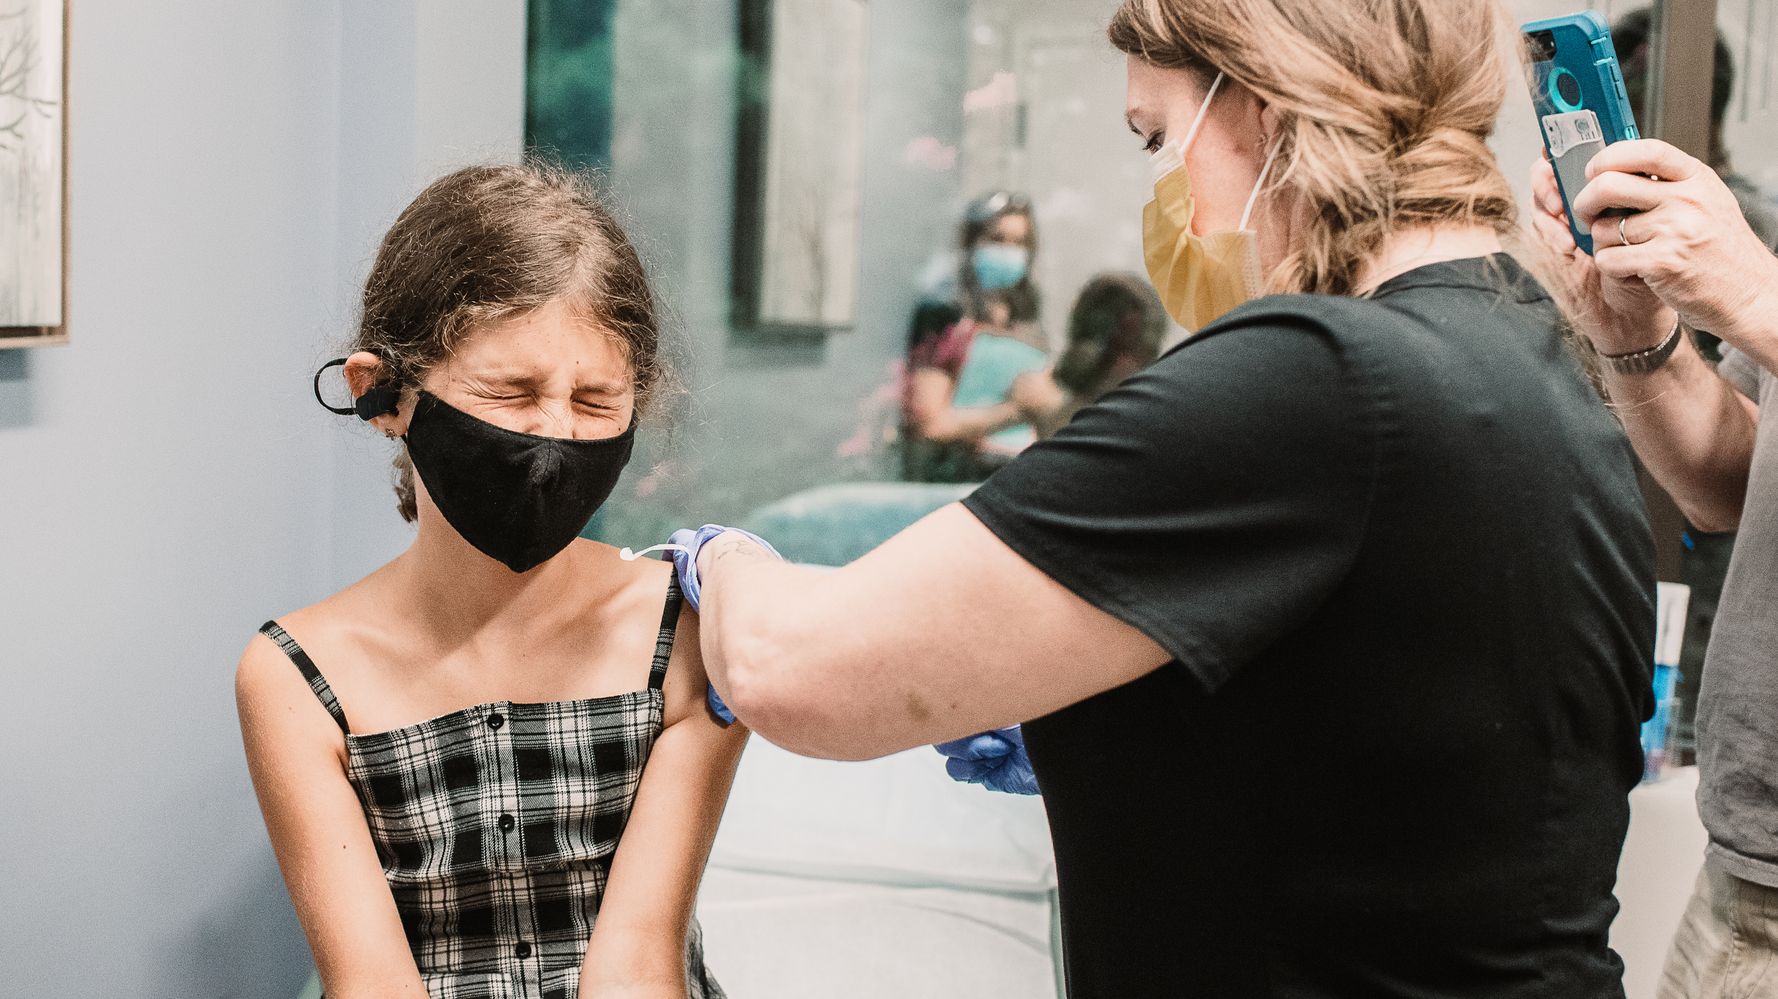 I Enrolled My Kids Under 12 In A COVID-19 Vaccine Trial. Here’s What Happened.